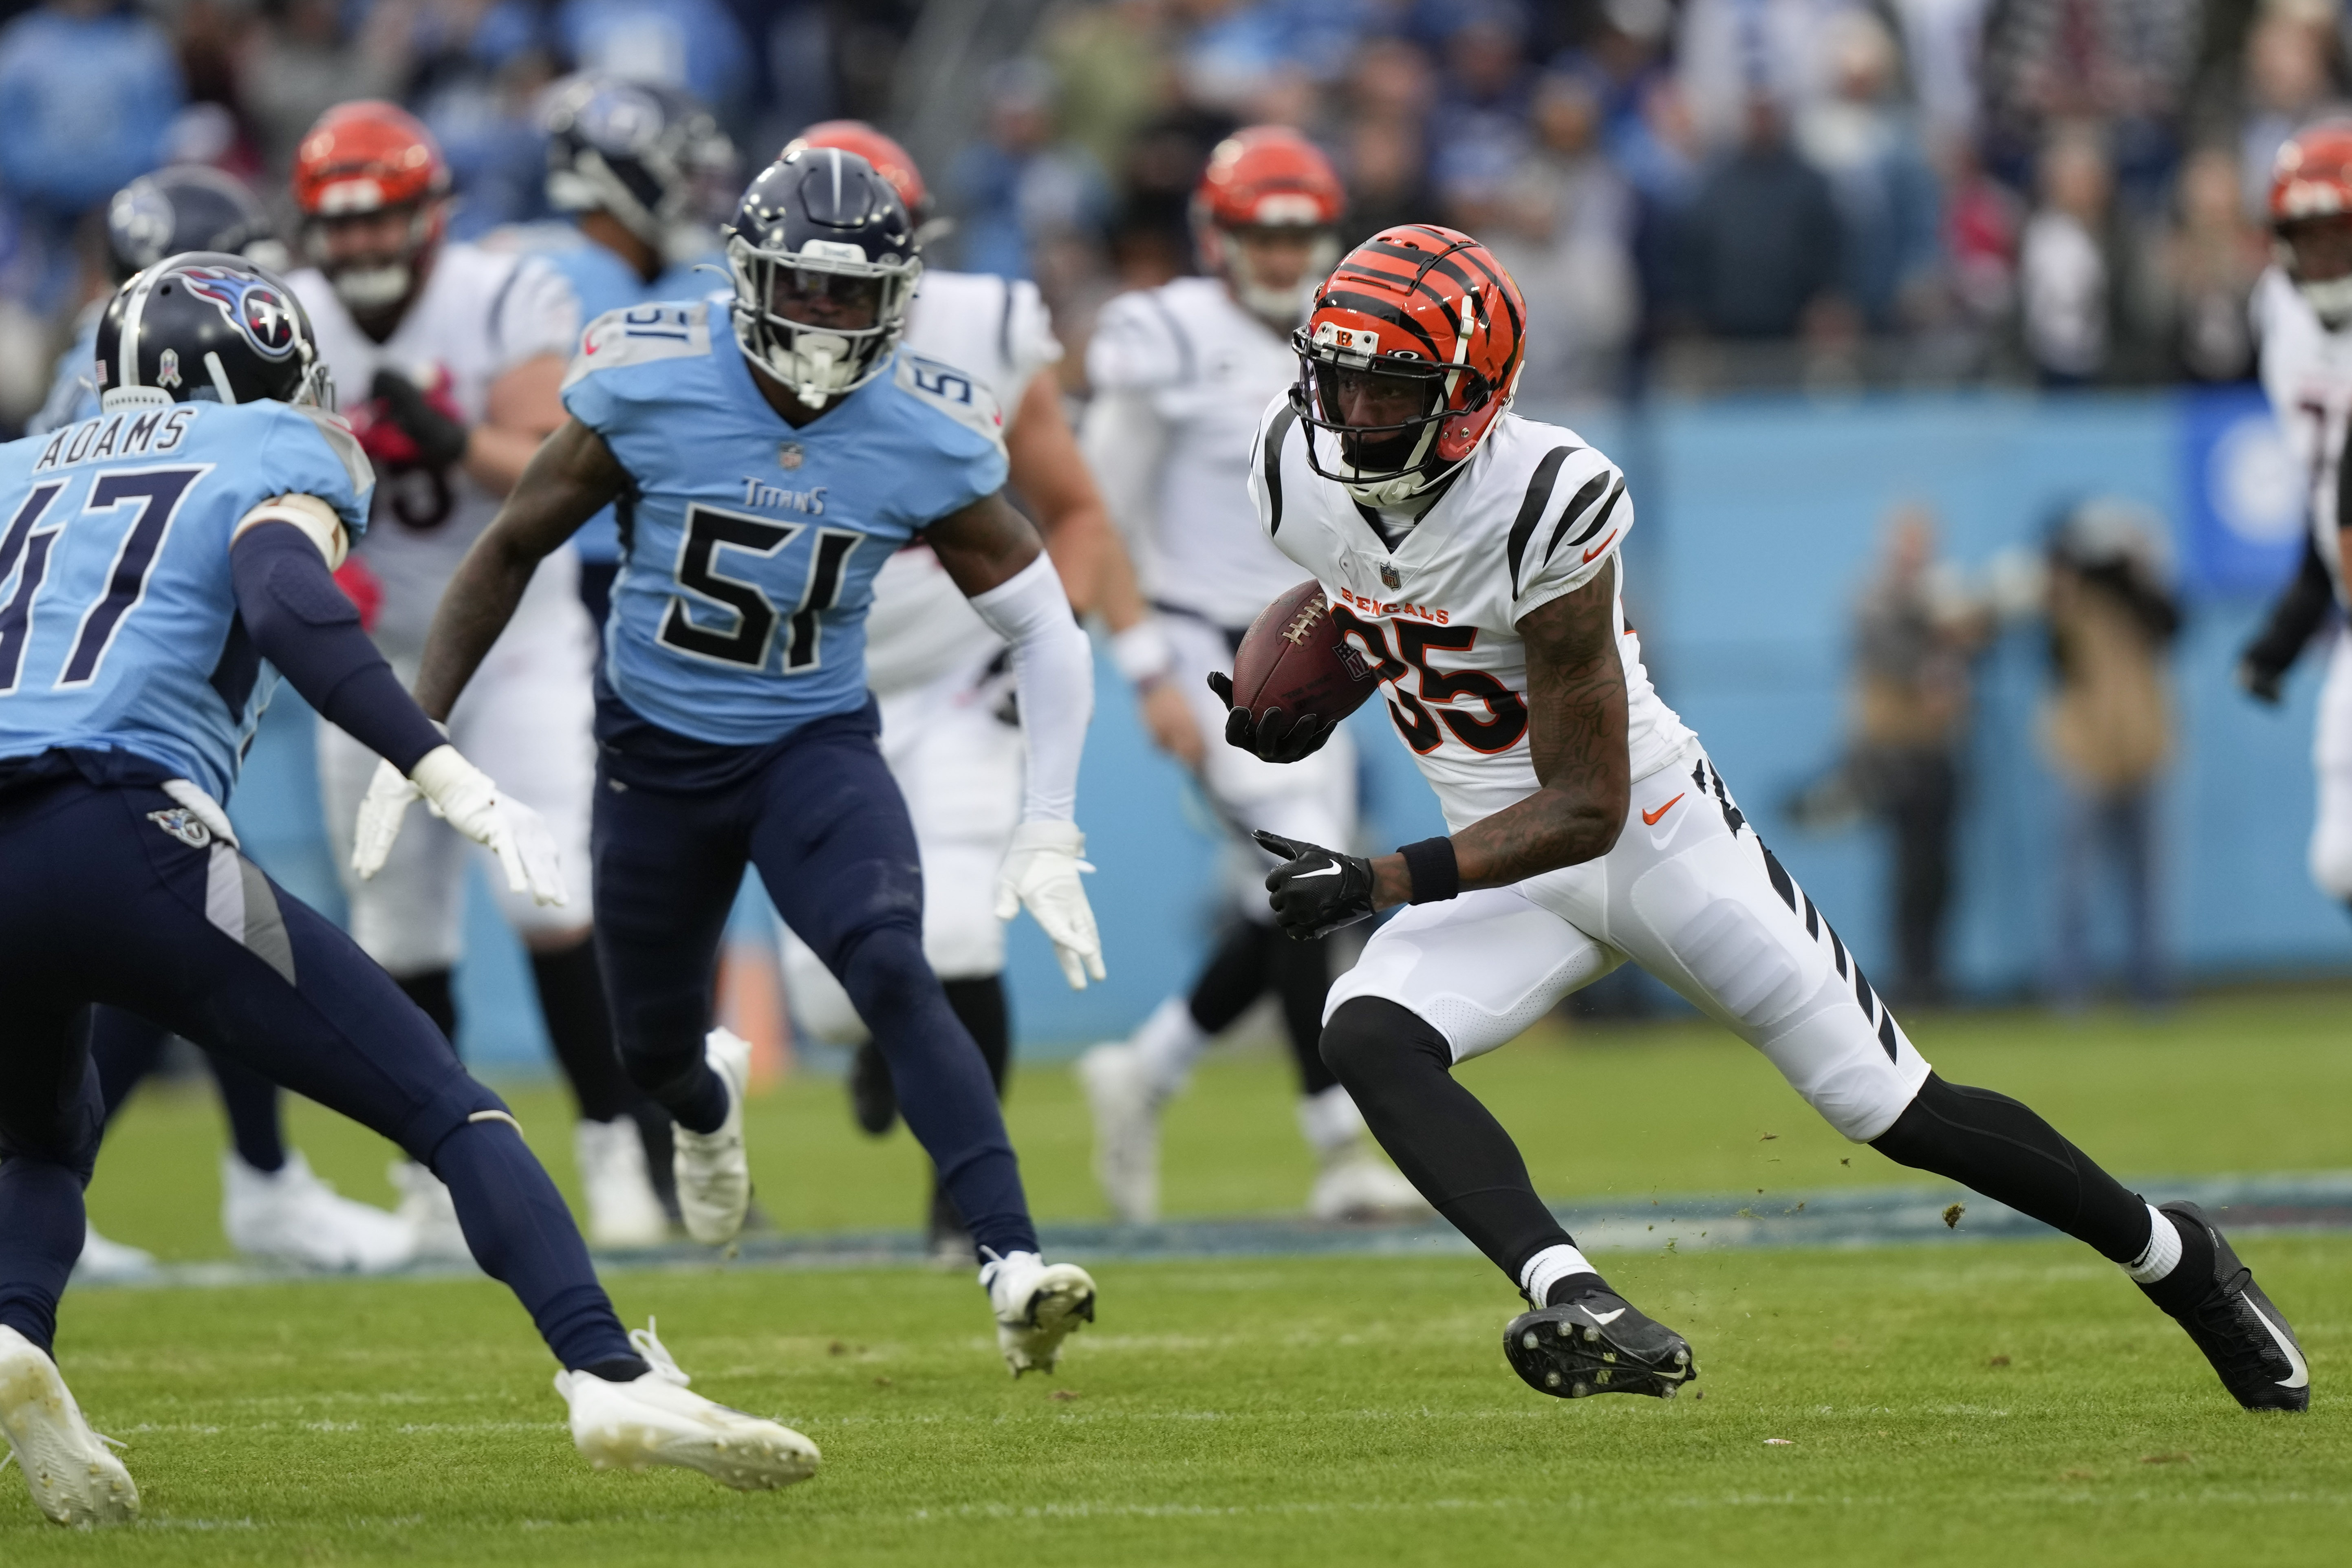 Watch the Bengals take a lead vs. the Titans after Joe Burrow